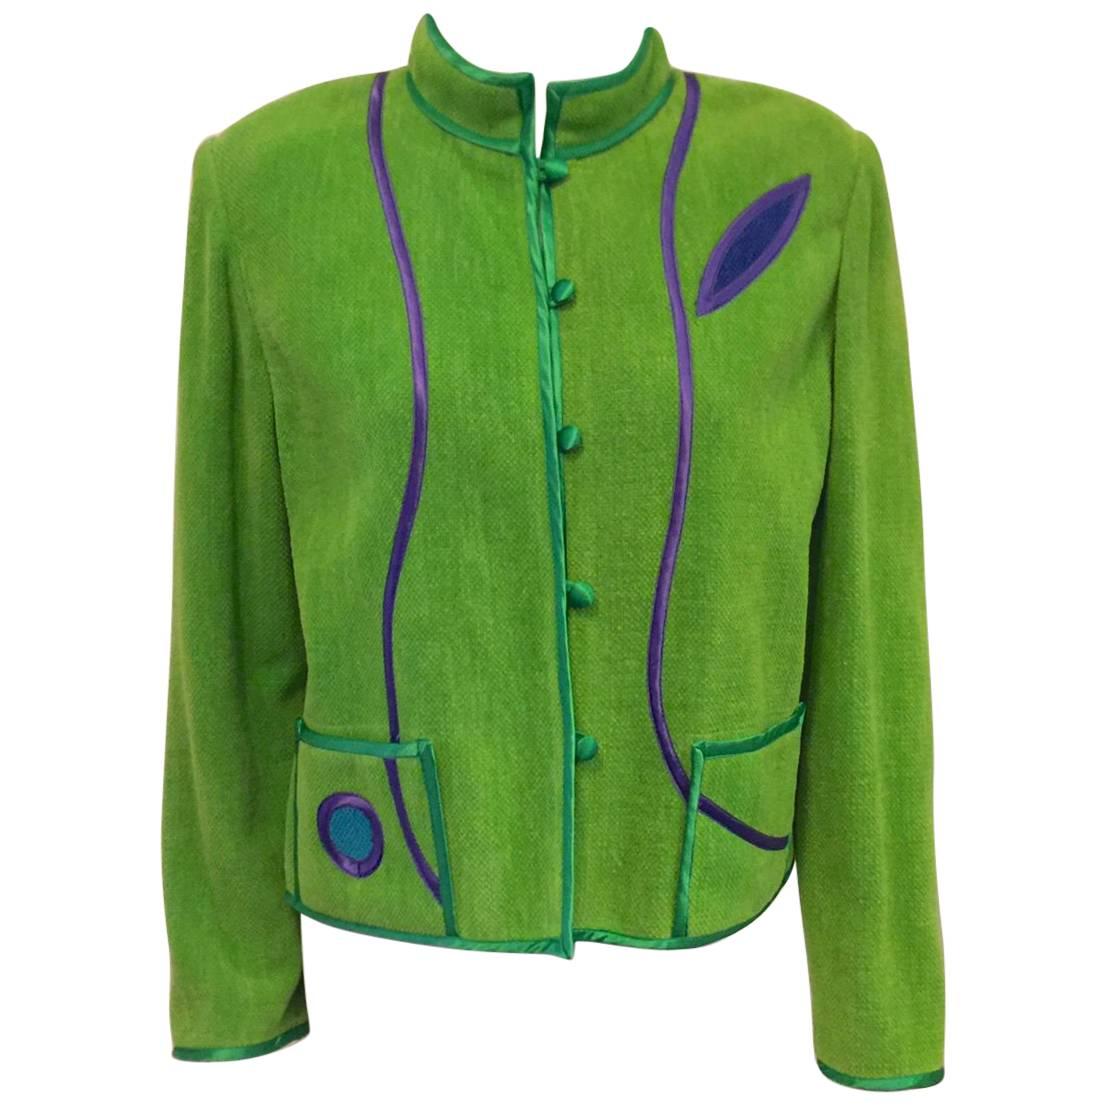 Annikki Karvinen Handmade Green Cotton Jacket With Abstract Appliques For Sale